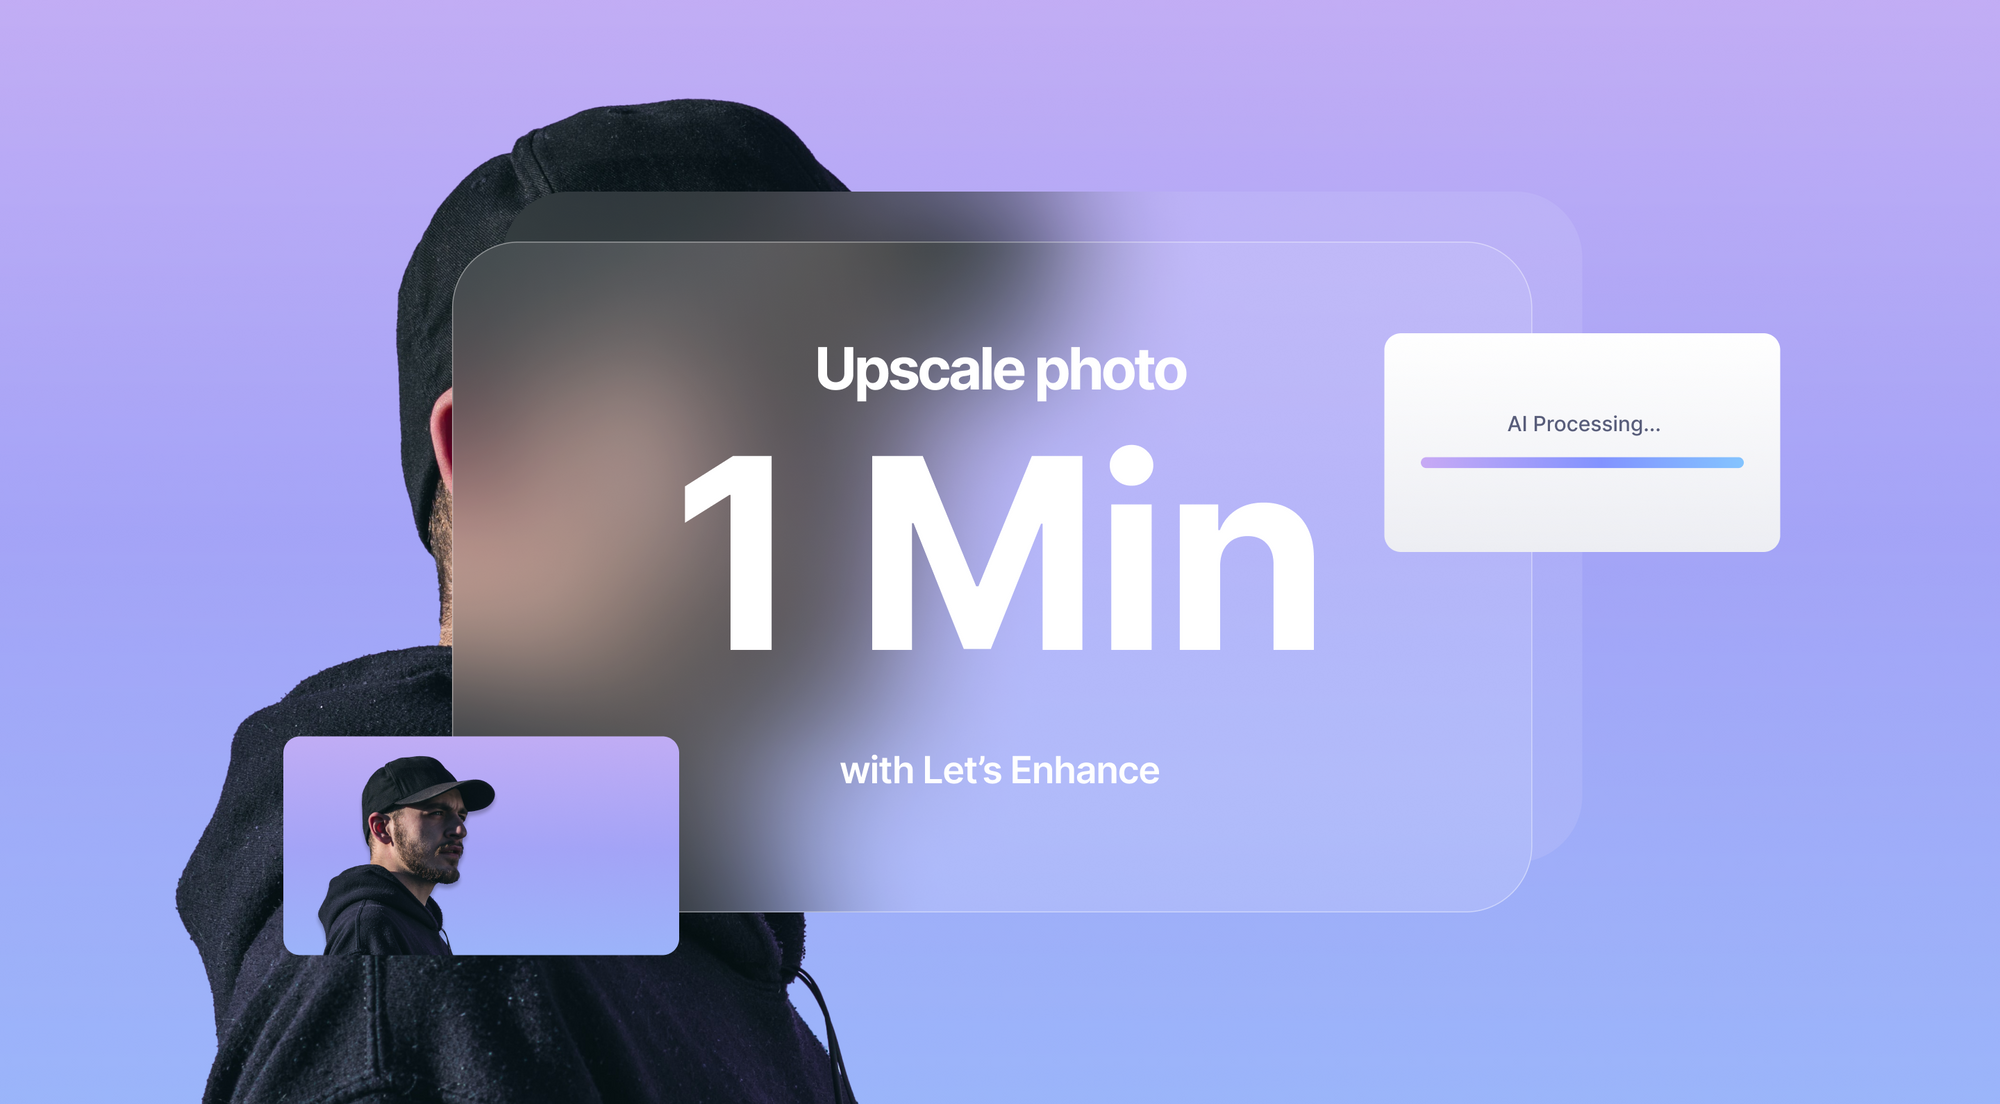 How to Upscale a Photo in Seconds with Let's Enhance